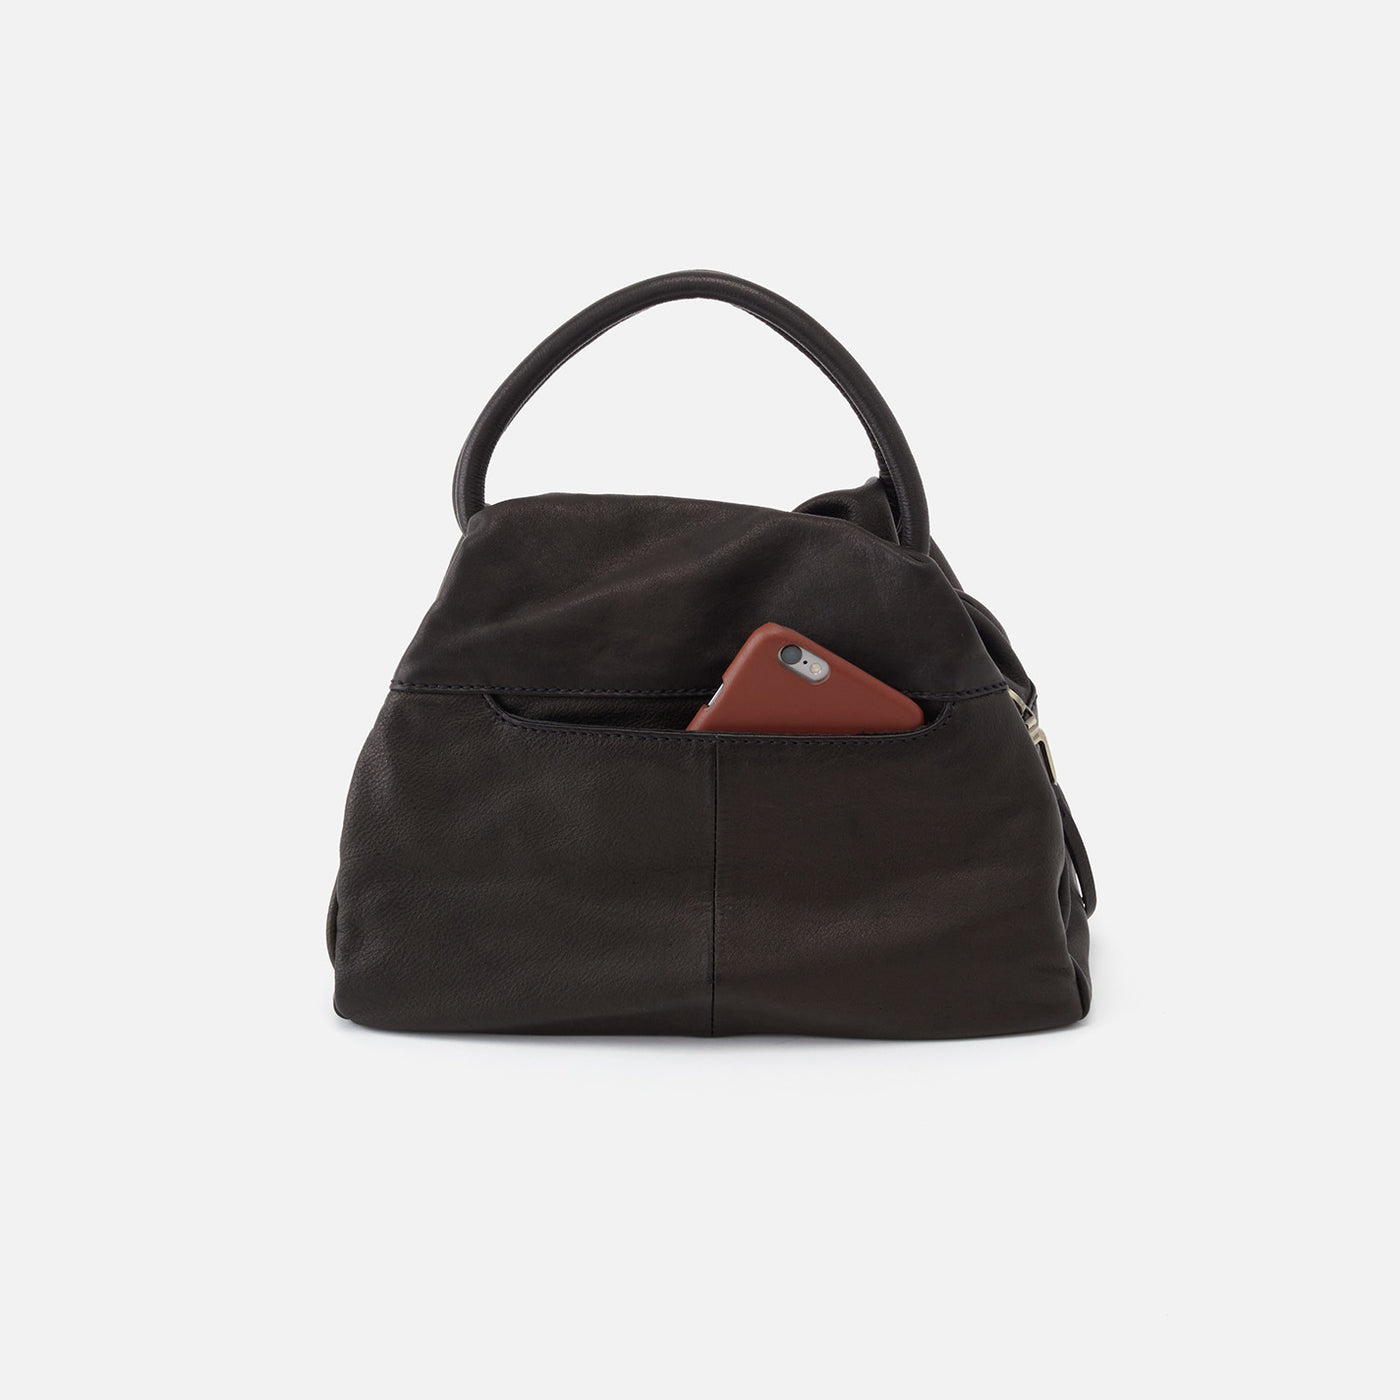 Darling Small Satchel In Soft Leather